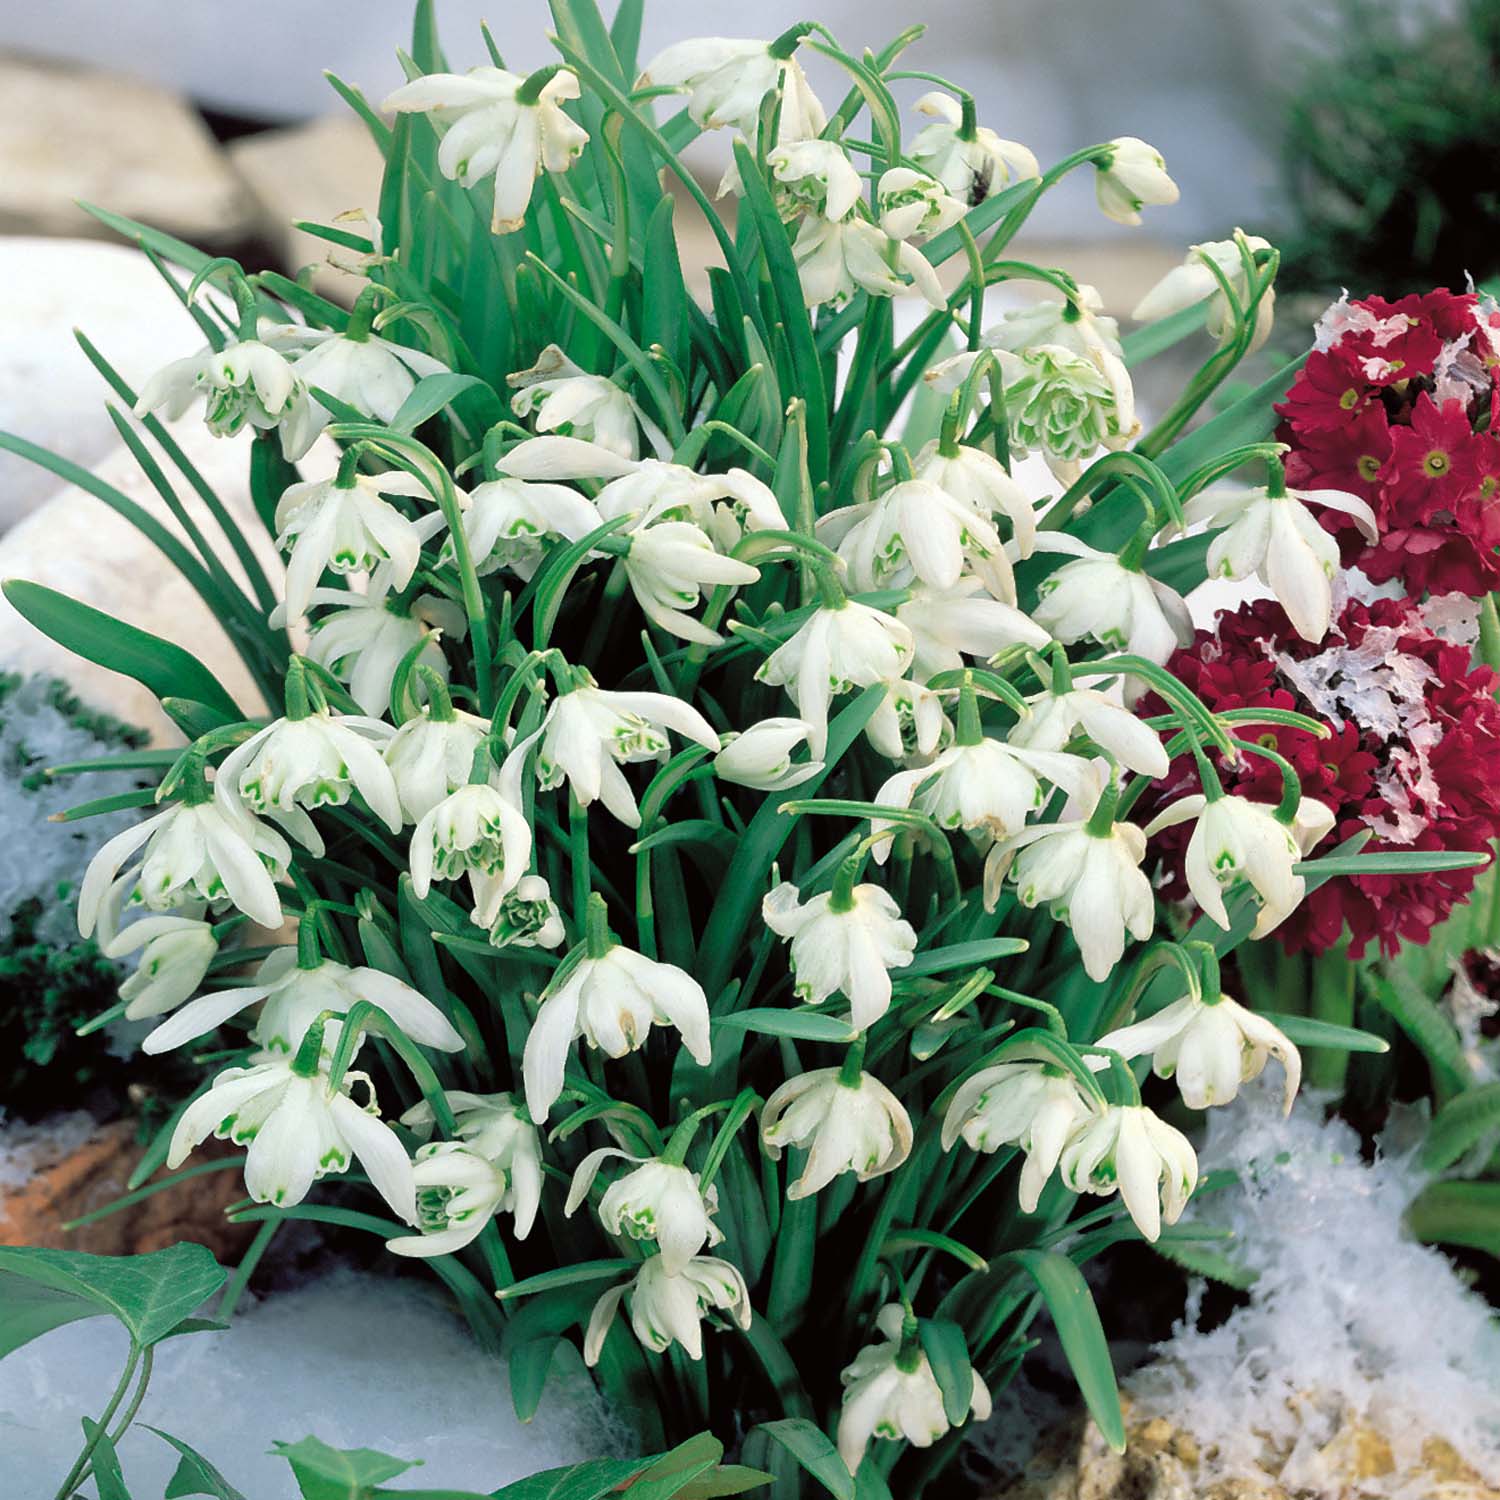 Snowdrops (Double Flowered)